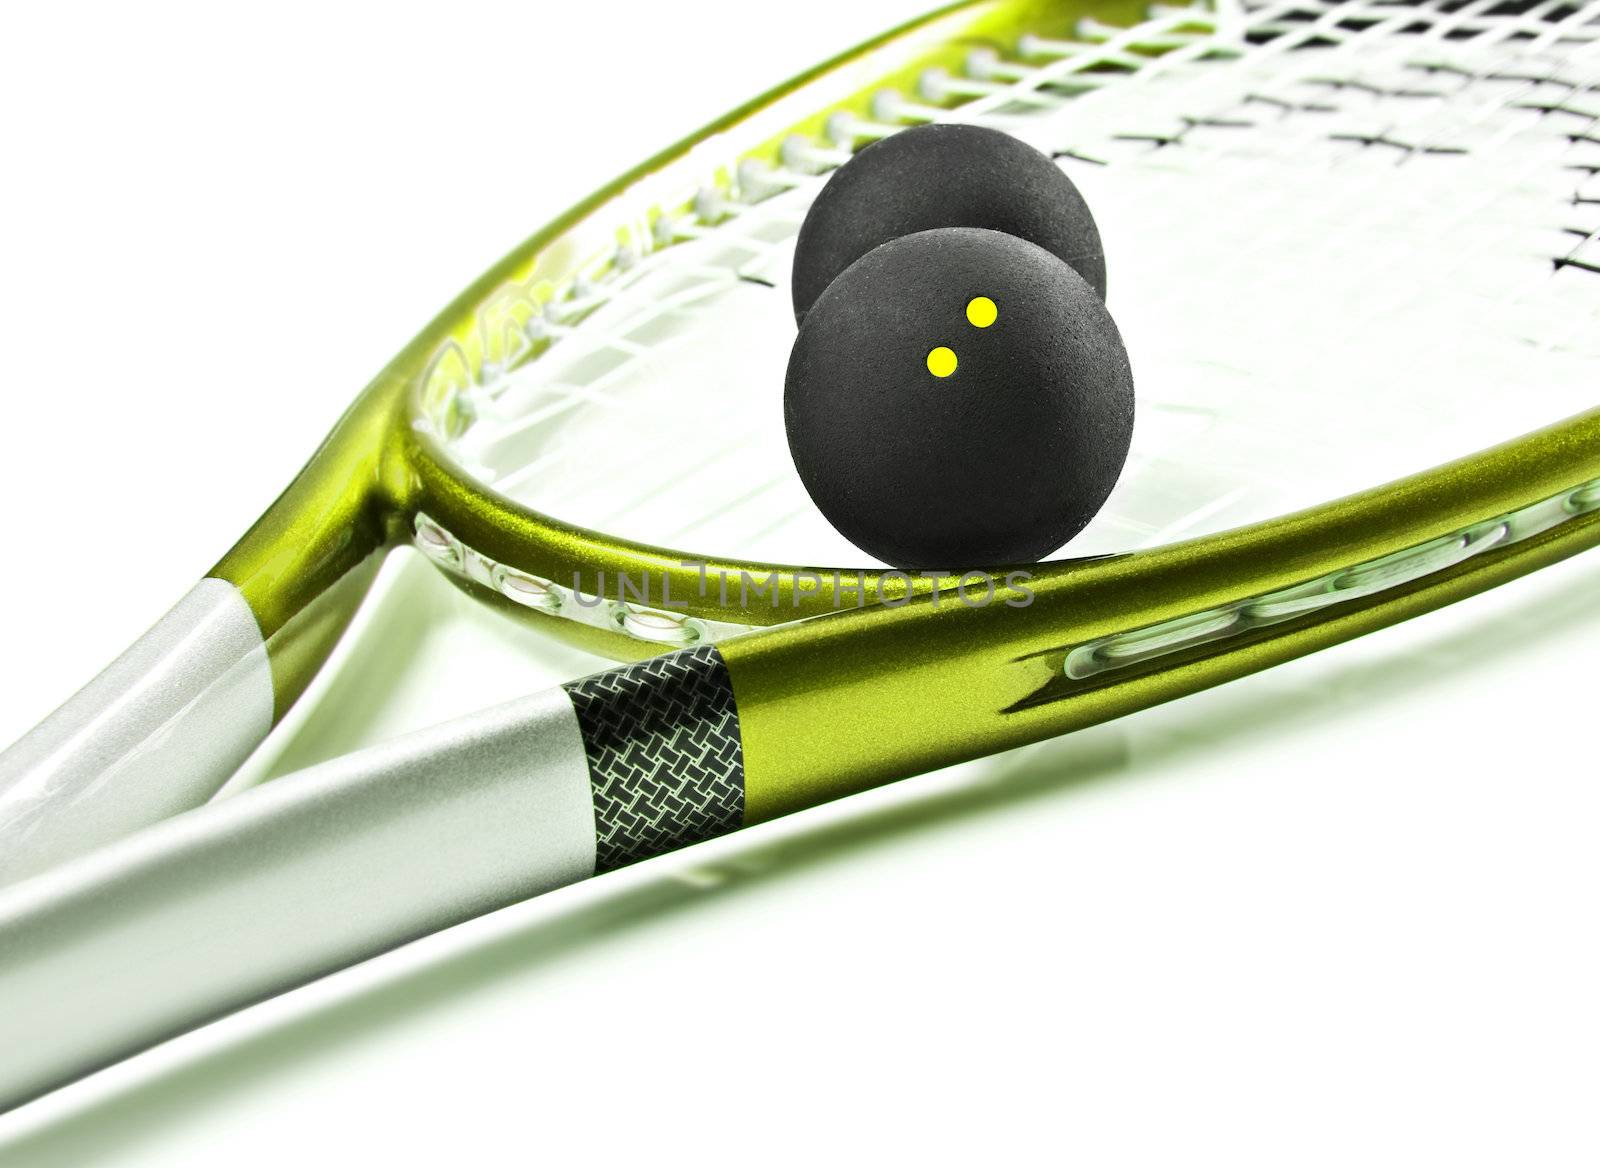 Green and silver squash racket and balls by tish1